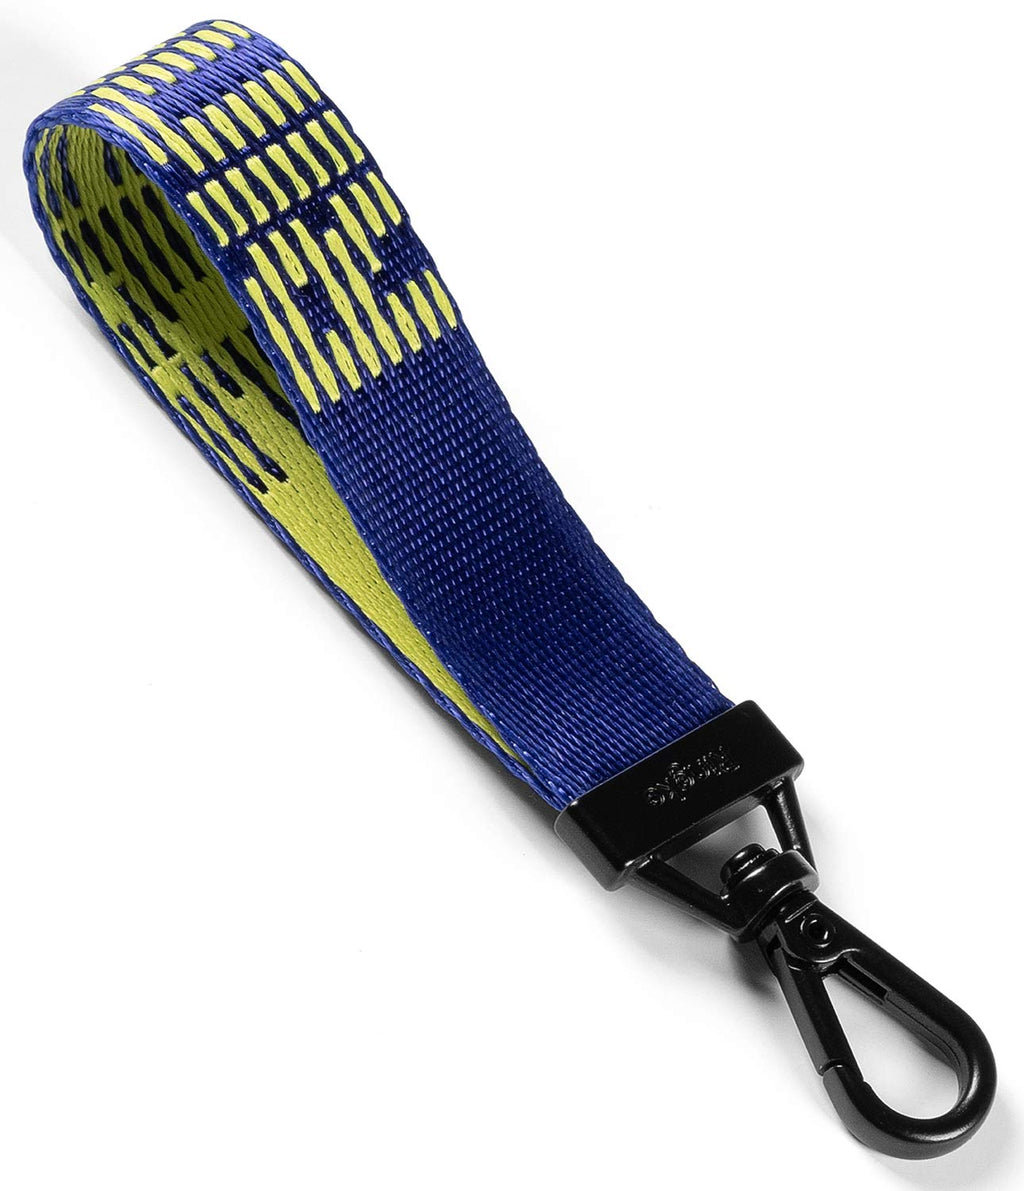  [AUSTRALIA] - Ringke Key Ring Strap Compatible with Earbuds, Keys, Cameras & ID QuikCatch Keyring Lanyard - Lettering Royal Blue